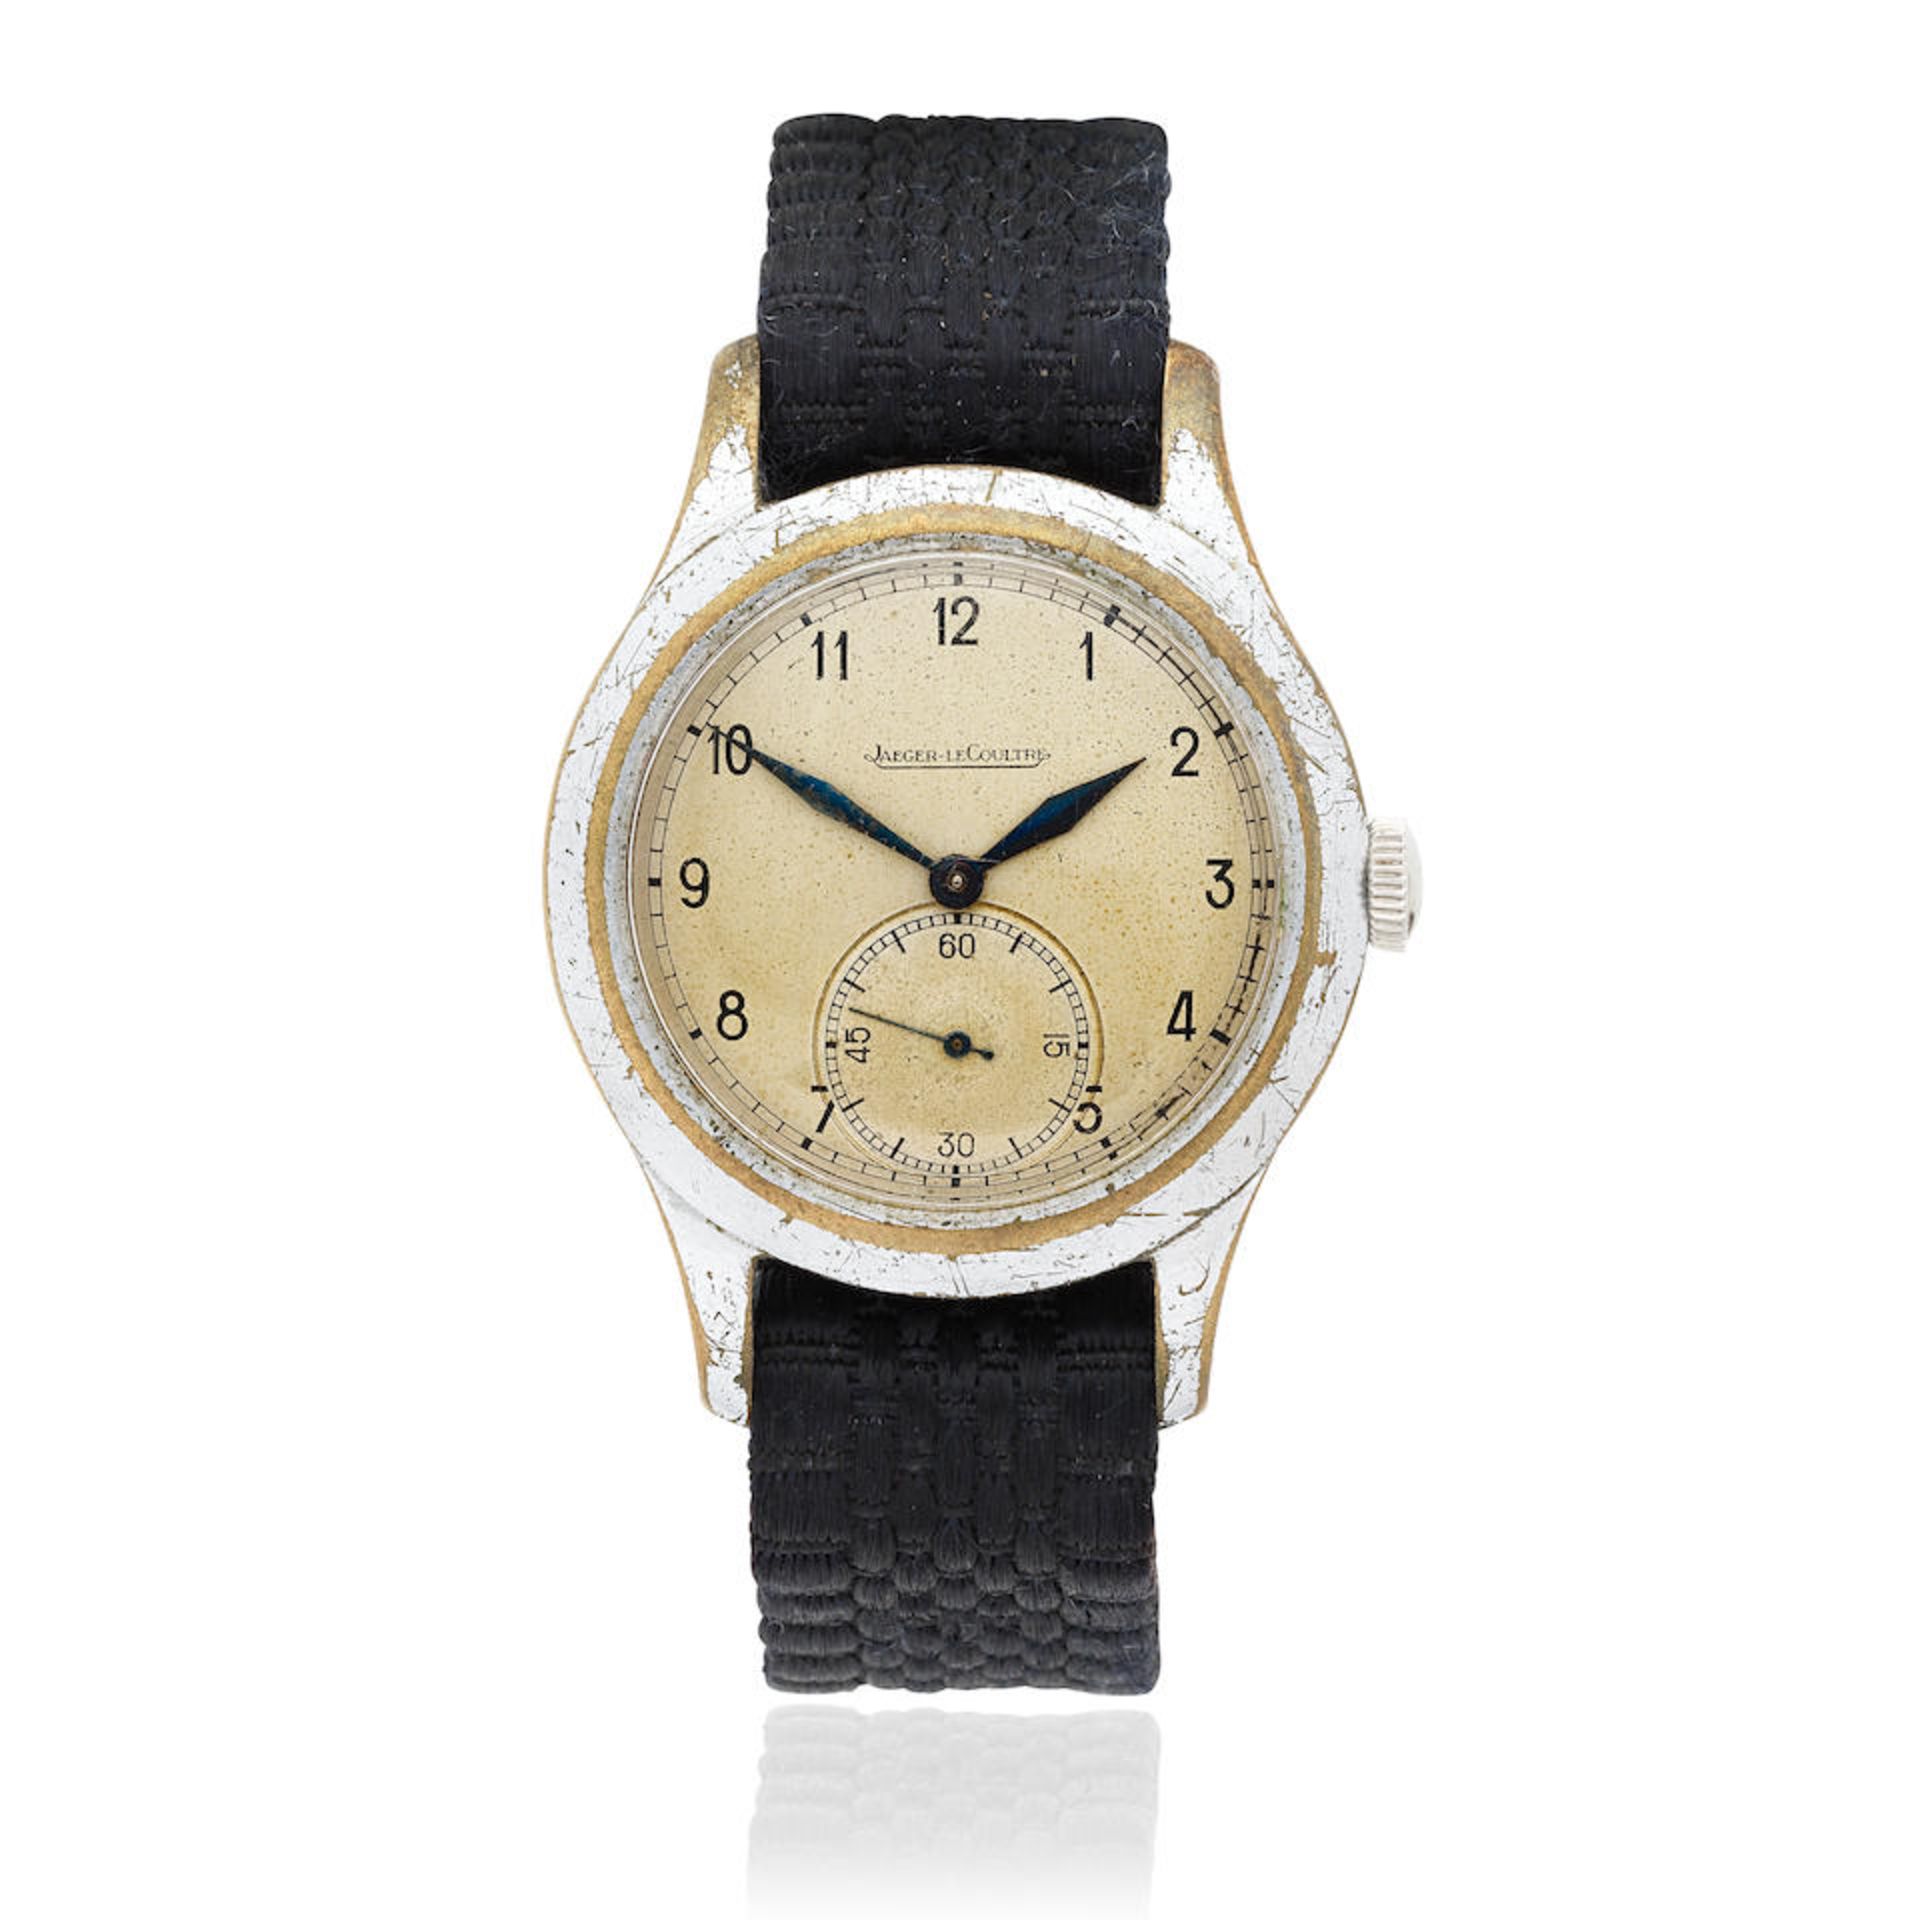 Jaeger-LeCoultre. A chrome plated manual wind wristwatch Circa 1944